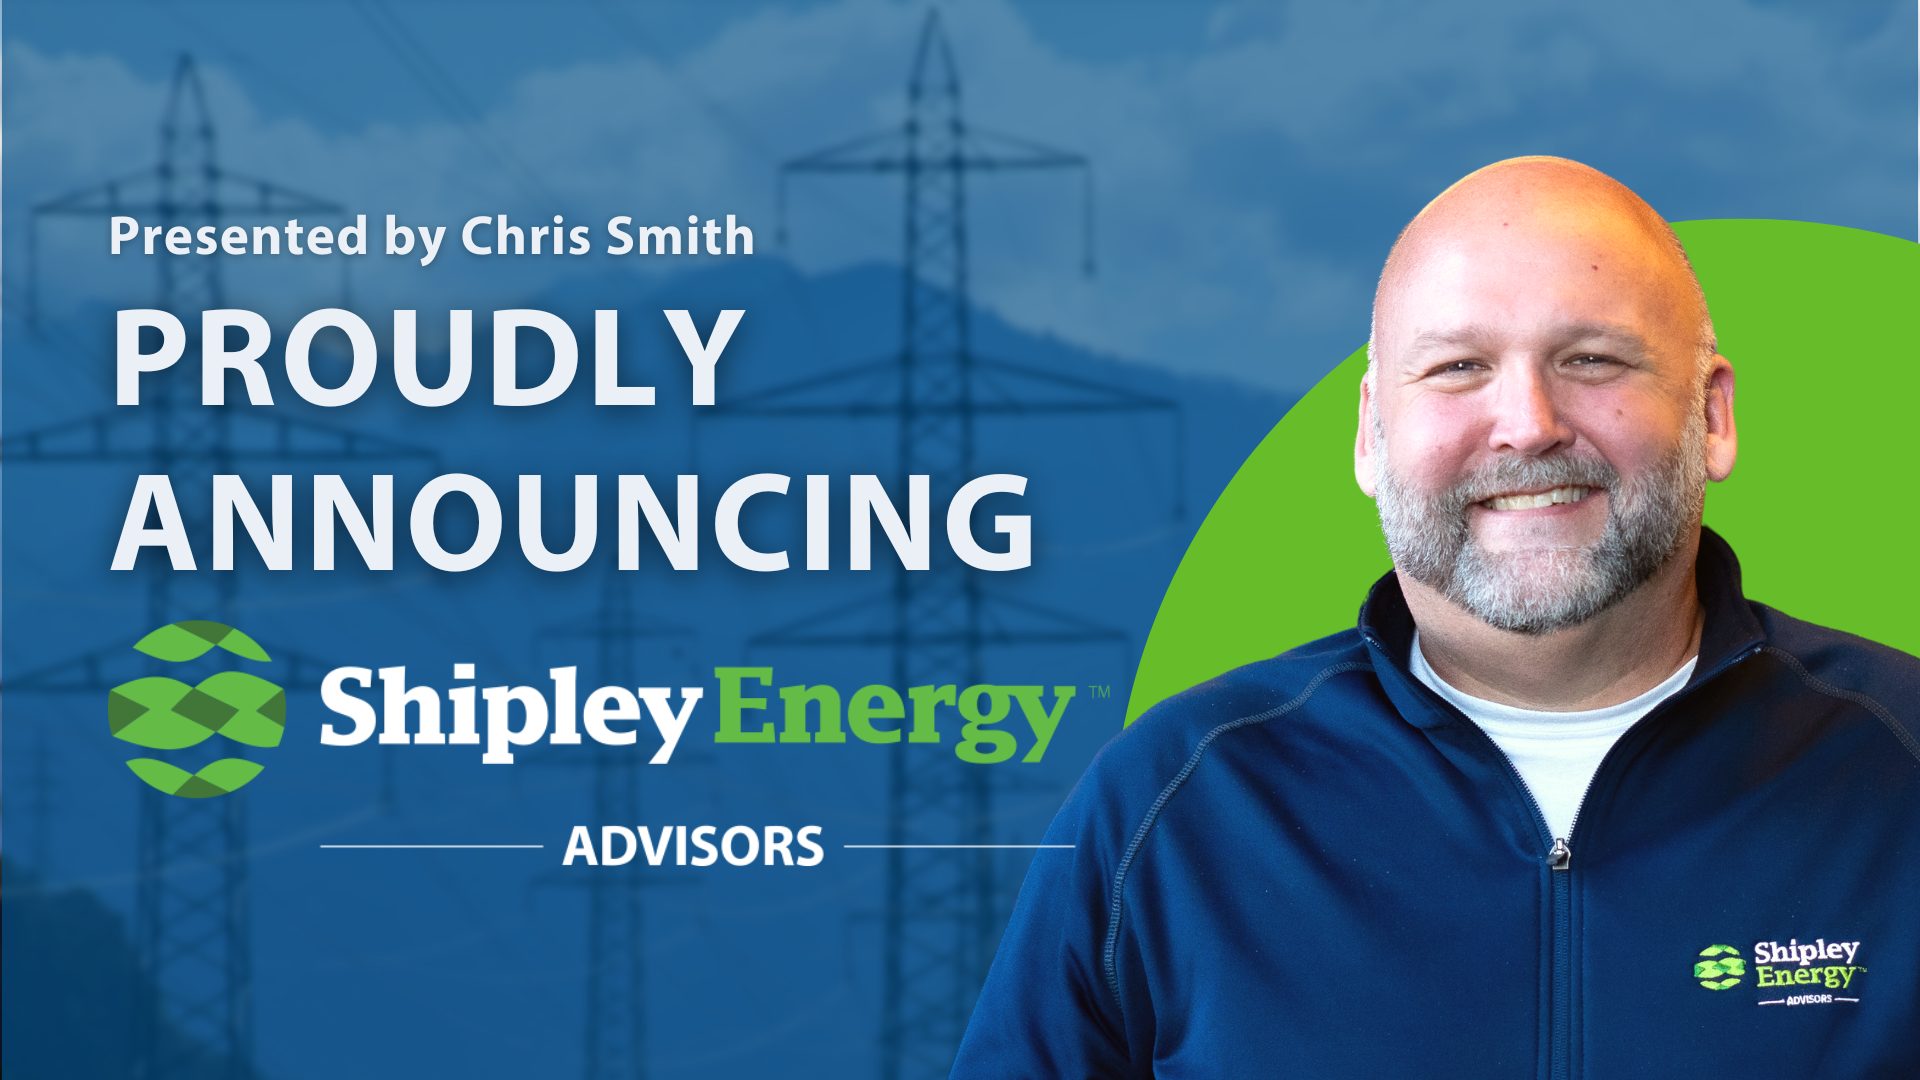 Proudly announcing Shipley Energy Advisors presented by Chris Smith